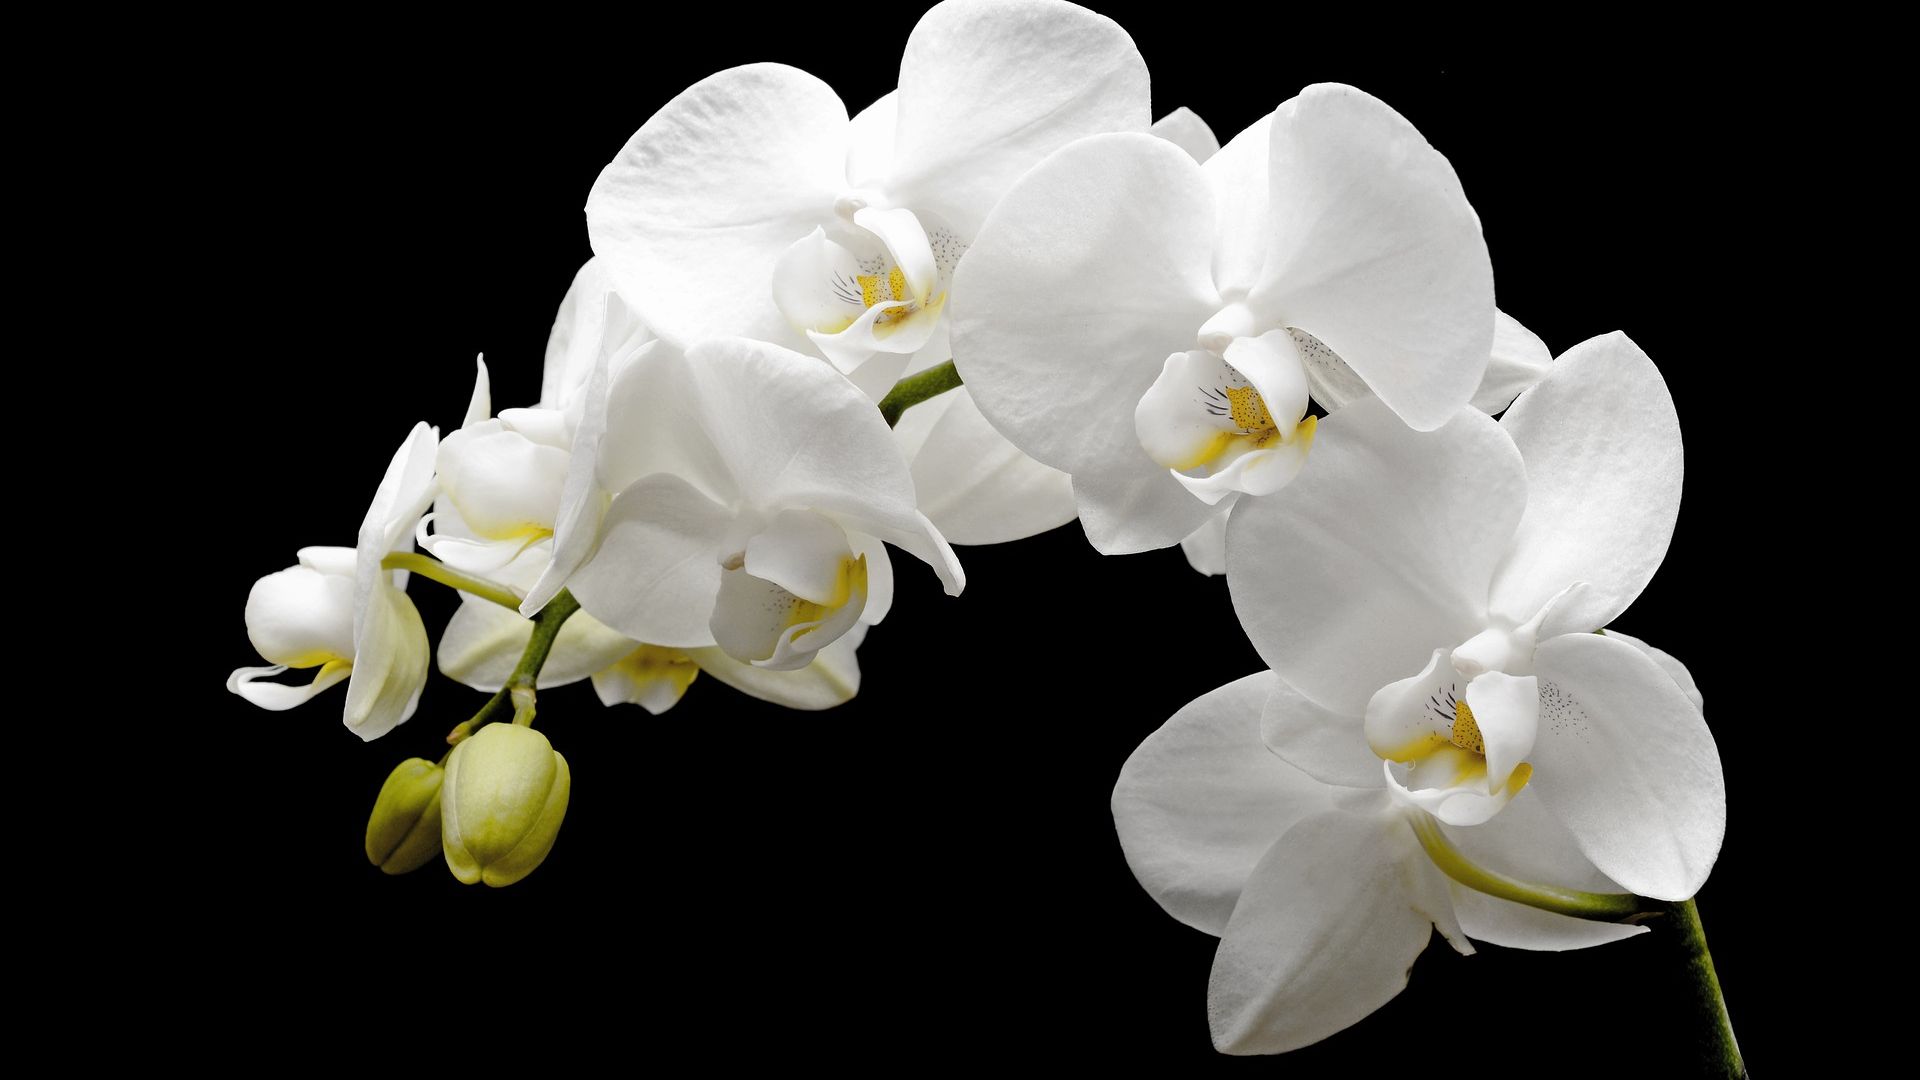 Blossom, White Orchid Flowers Wallpaper, 1920x1280, Hd Image, Picture, Qibyz